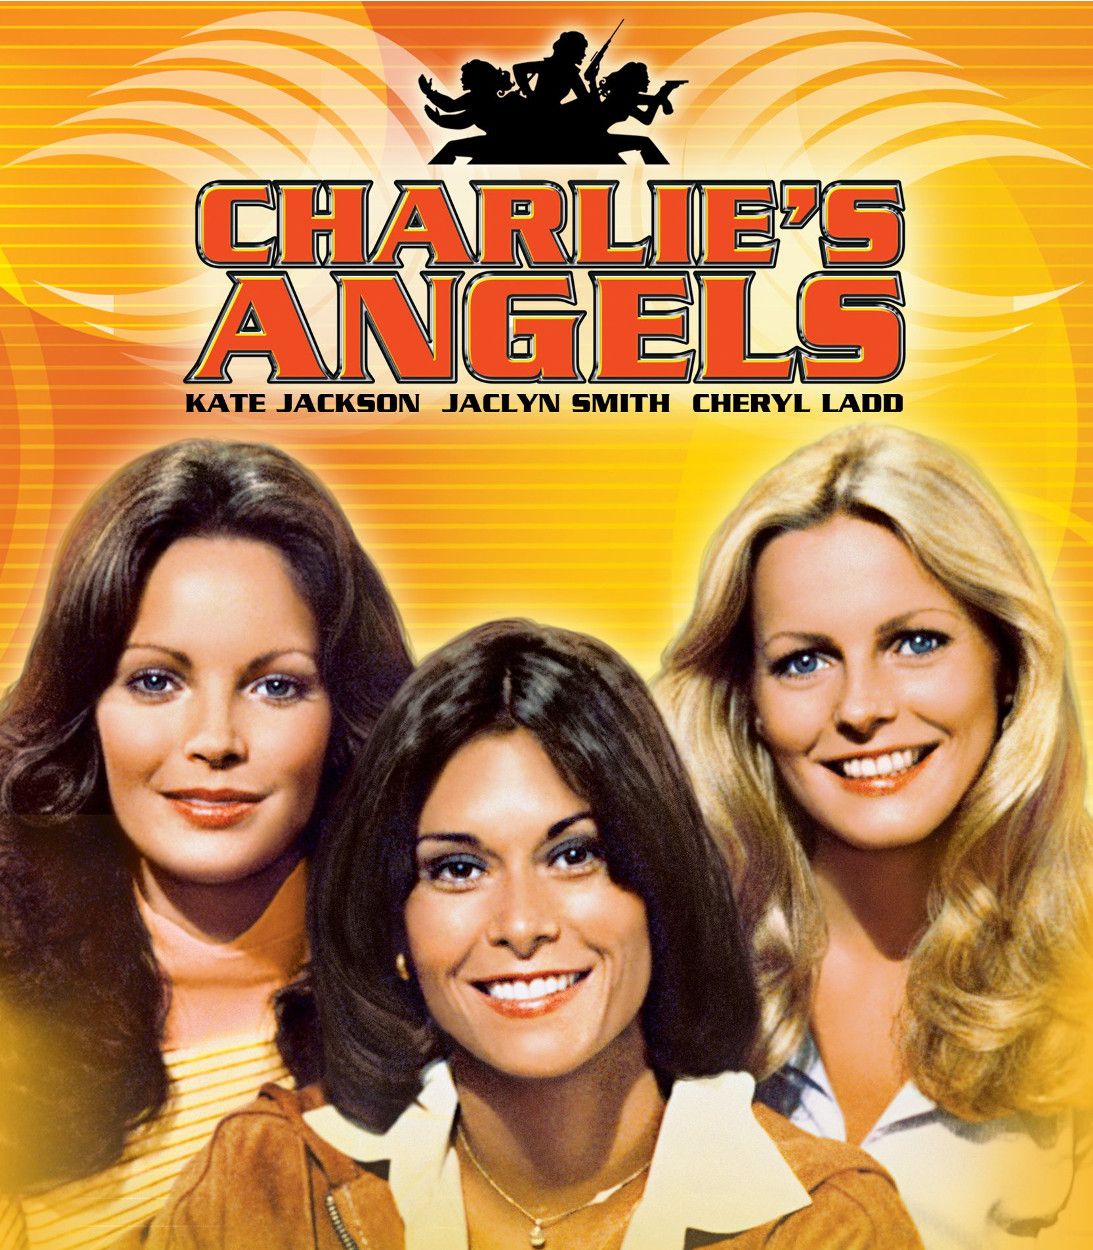 Kate Jackson, Jaclyn Smith and Cheryl Ladd in Charlie's Angels